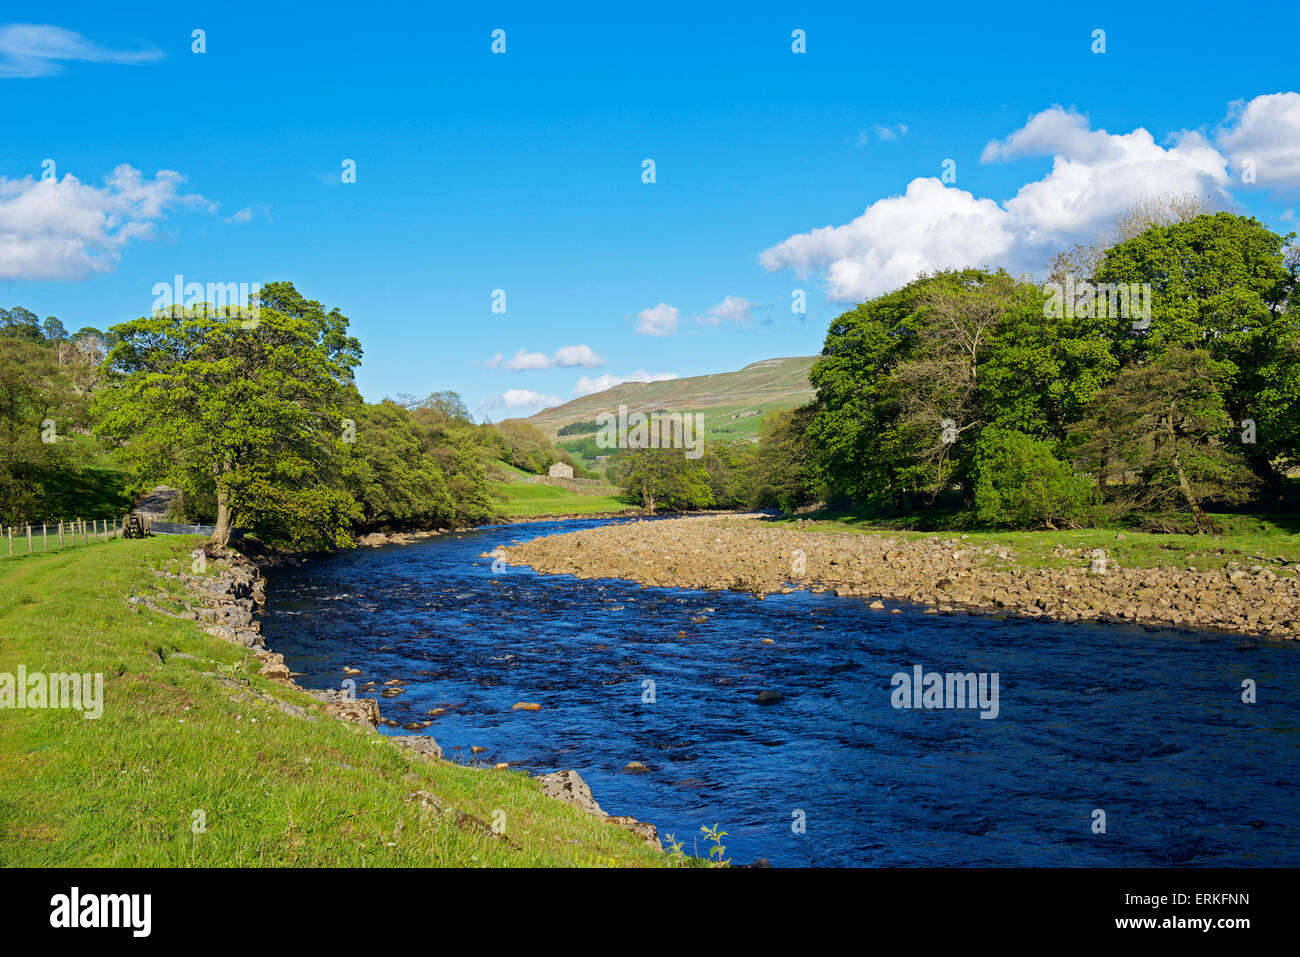 Fiume Swale vicino Muker, Swaledale, Yorkshire Dales National Park, North Yorkshire, Inghilterra, Regno Unito Foto Stock